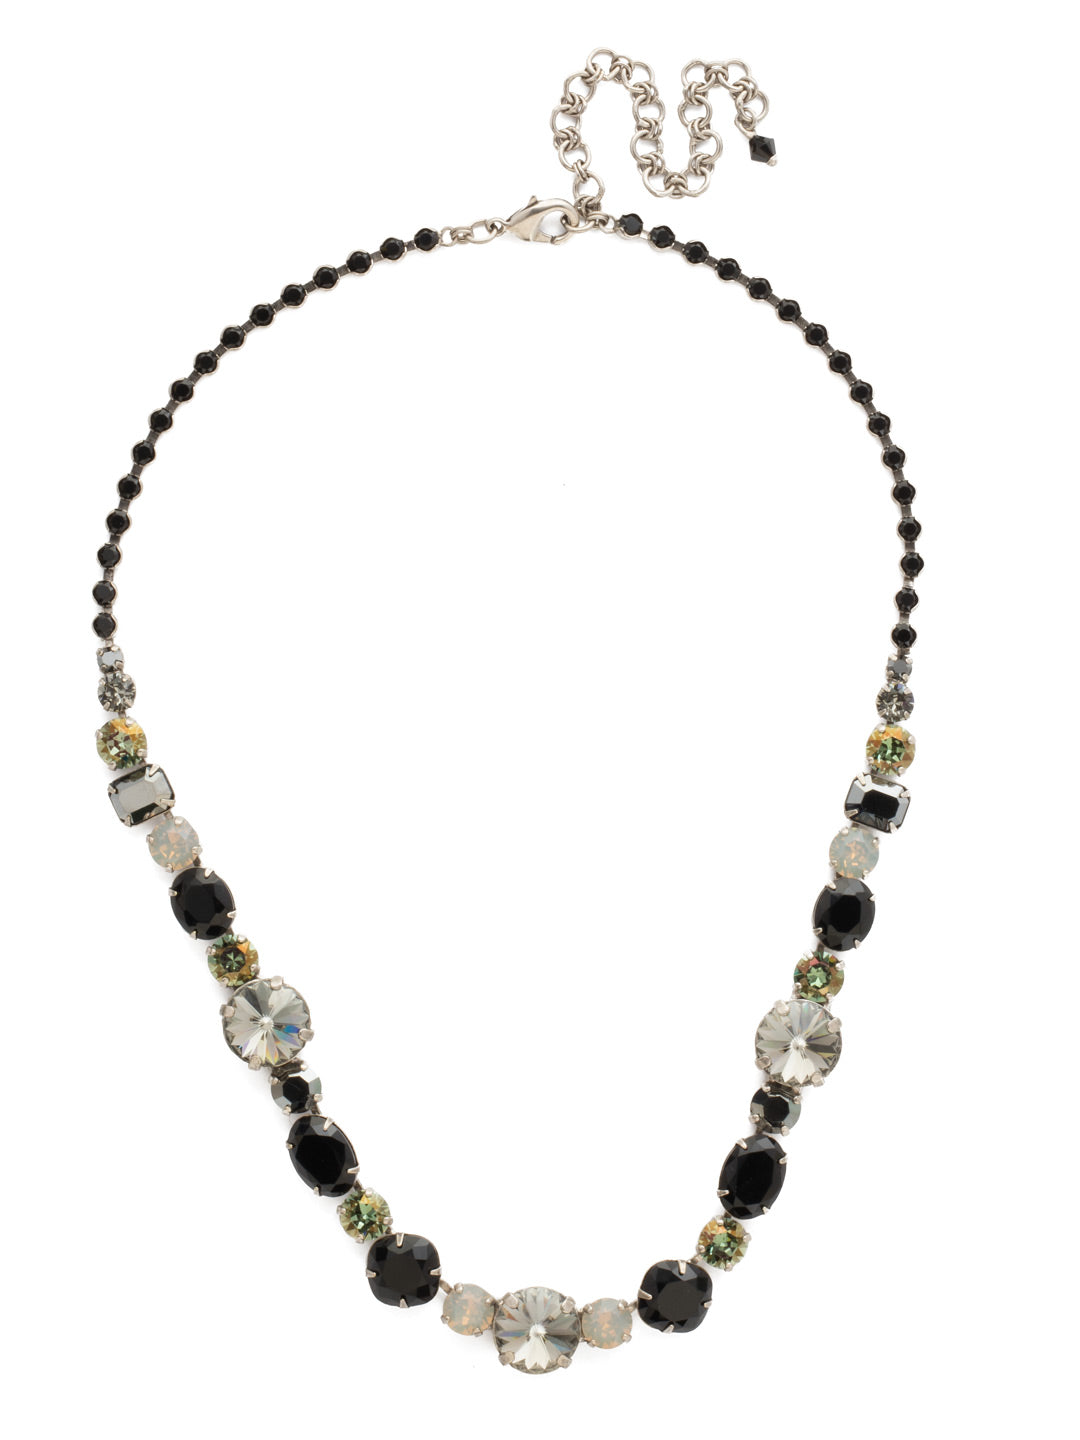 Graduated Classic Tennis Necklace - NCP38ASBON - <p>This classic line necklace has it all! A mix of cut crystals adorn your neck in endless sparkle. Nothing says beautiful like a woman that shines inside and out, and this necklace will help you do just that. From Sorrelli's Black Onyx collection in our Antique Silver-tone finish.</p>